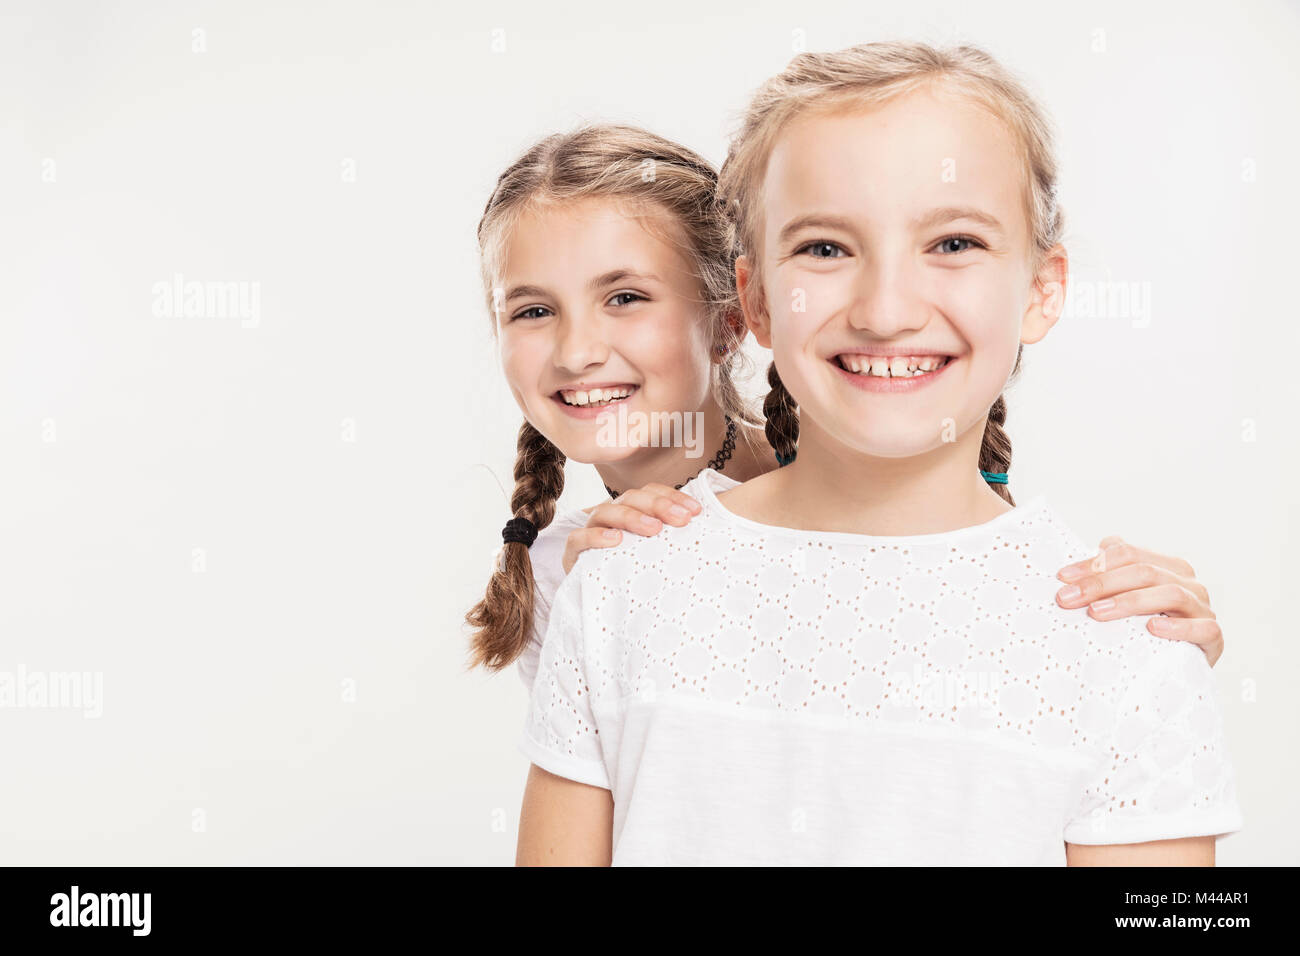 Studio portrait of two smiling girls, head and shoulders Stock Photo